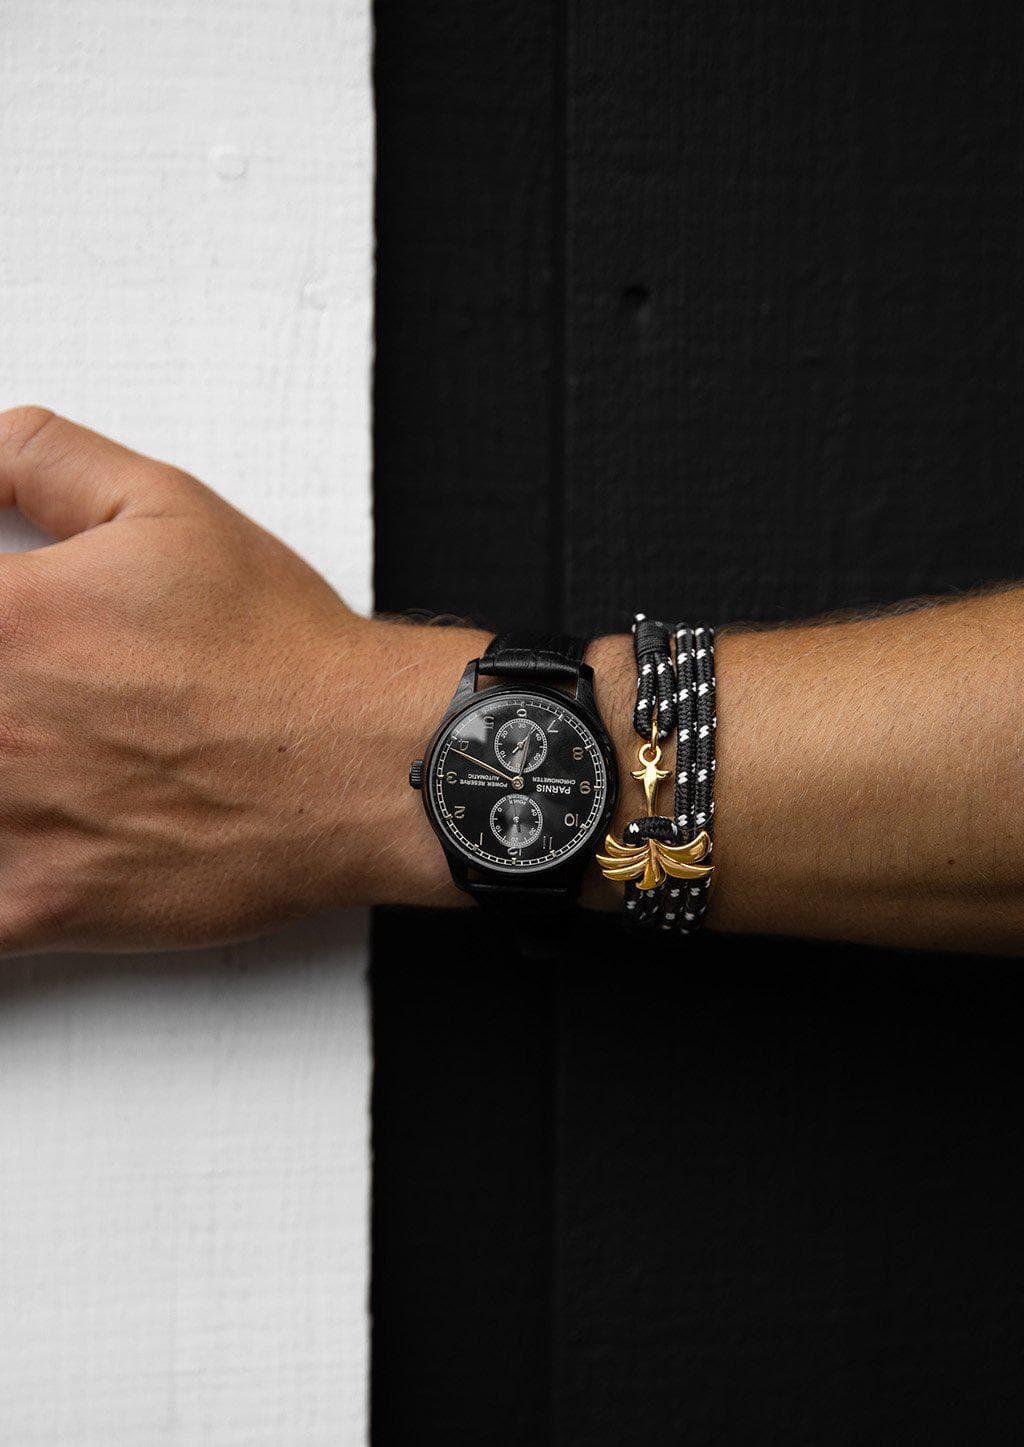 Trophy - Triple - Season two Palm anchor bracelet with black and white nylon band. Black and white wall.